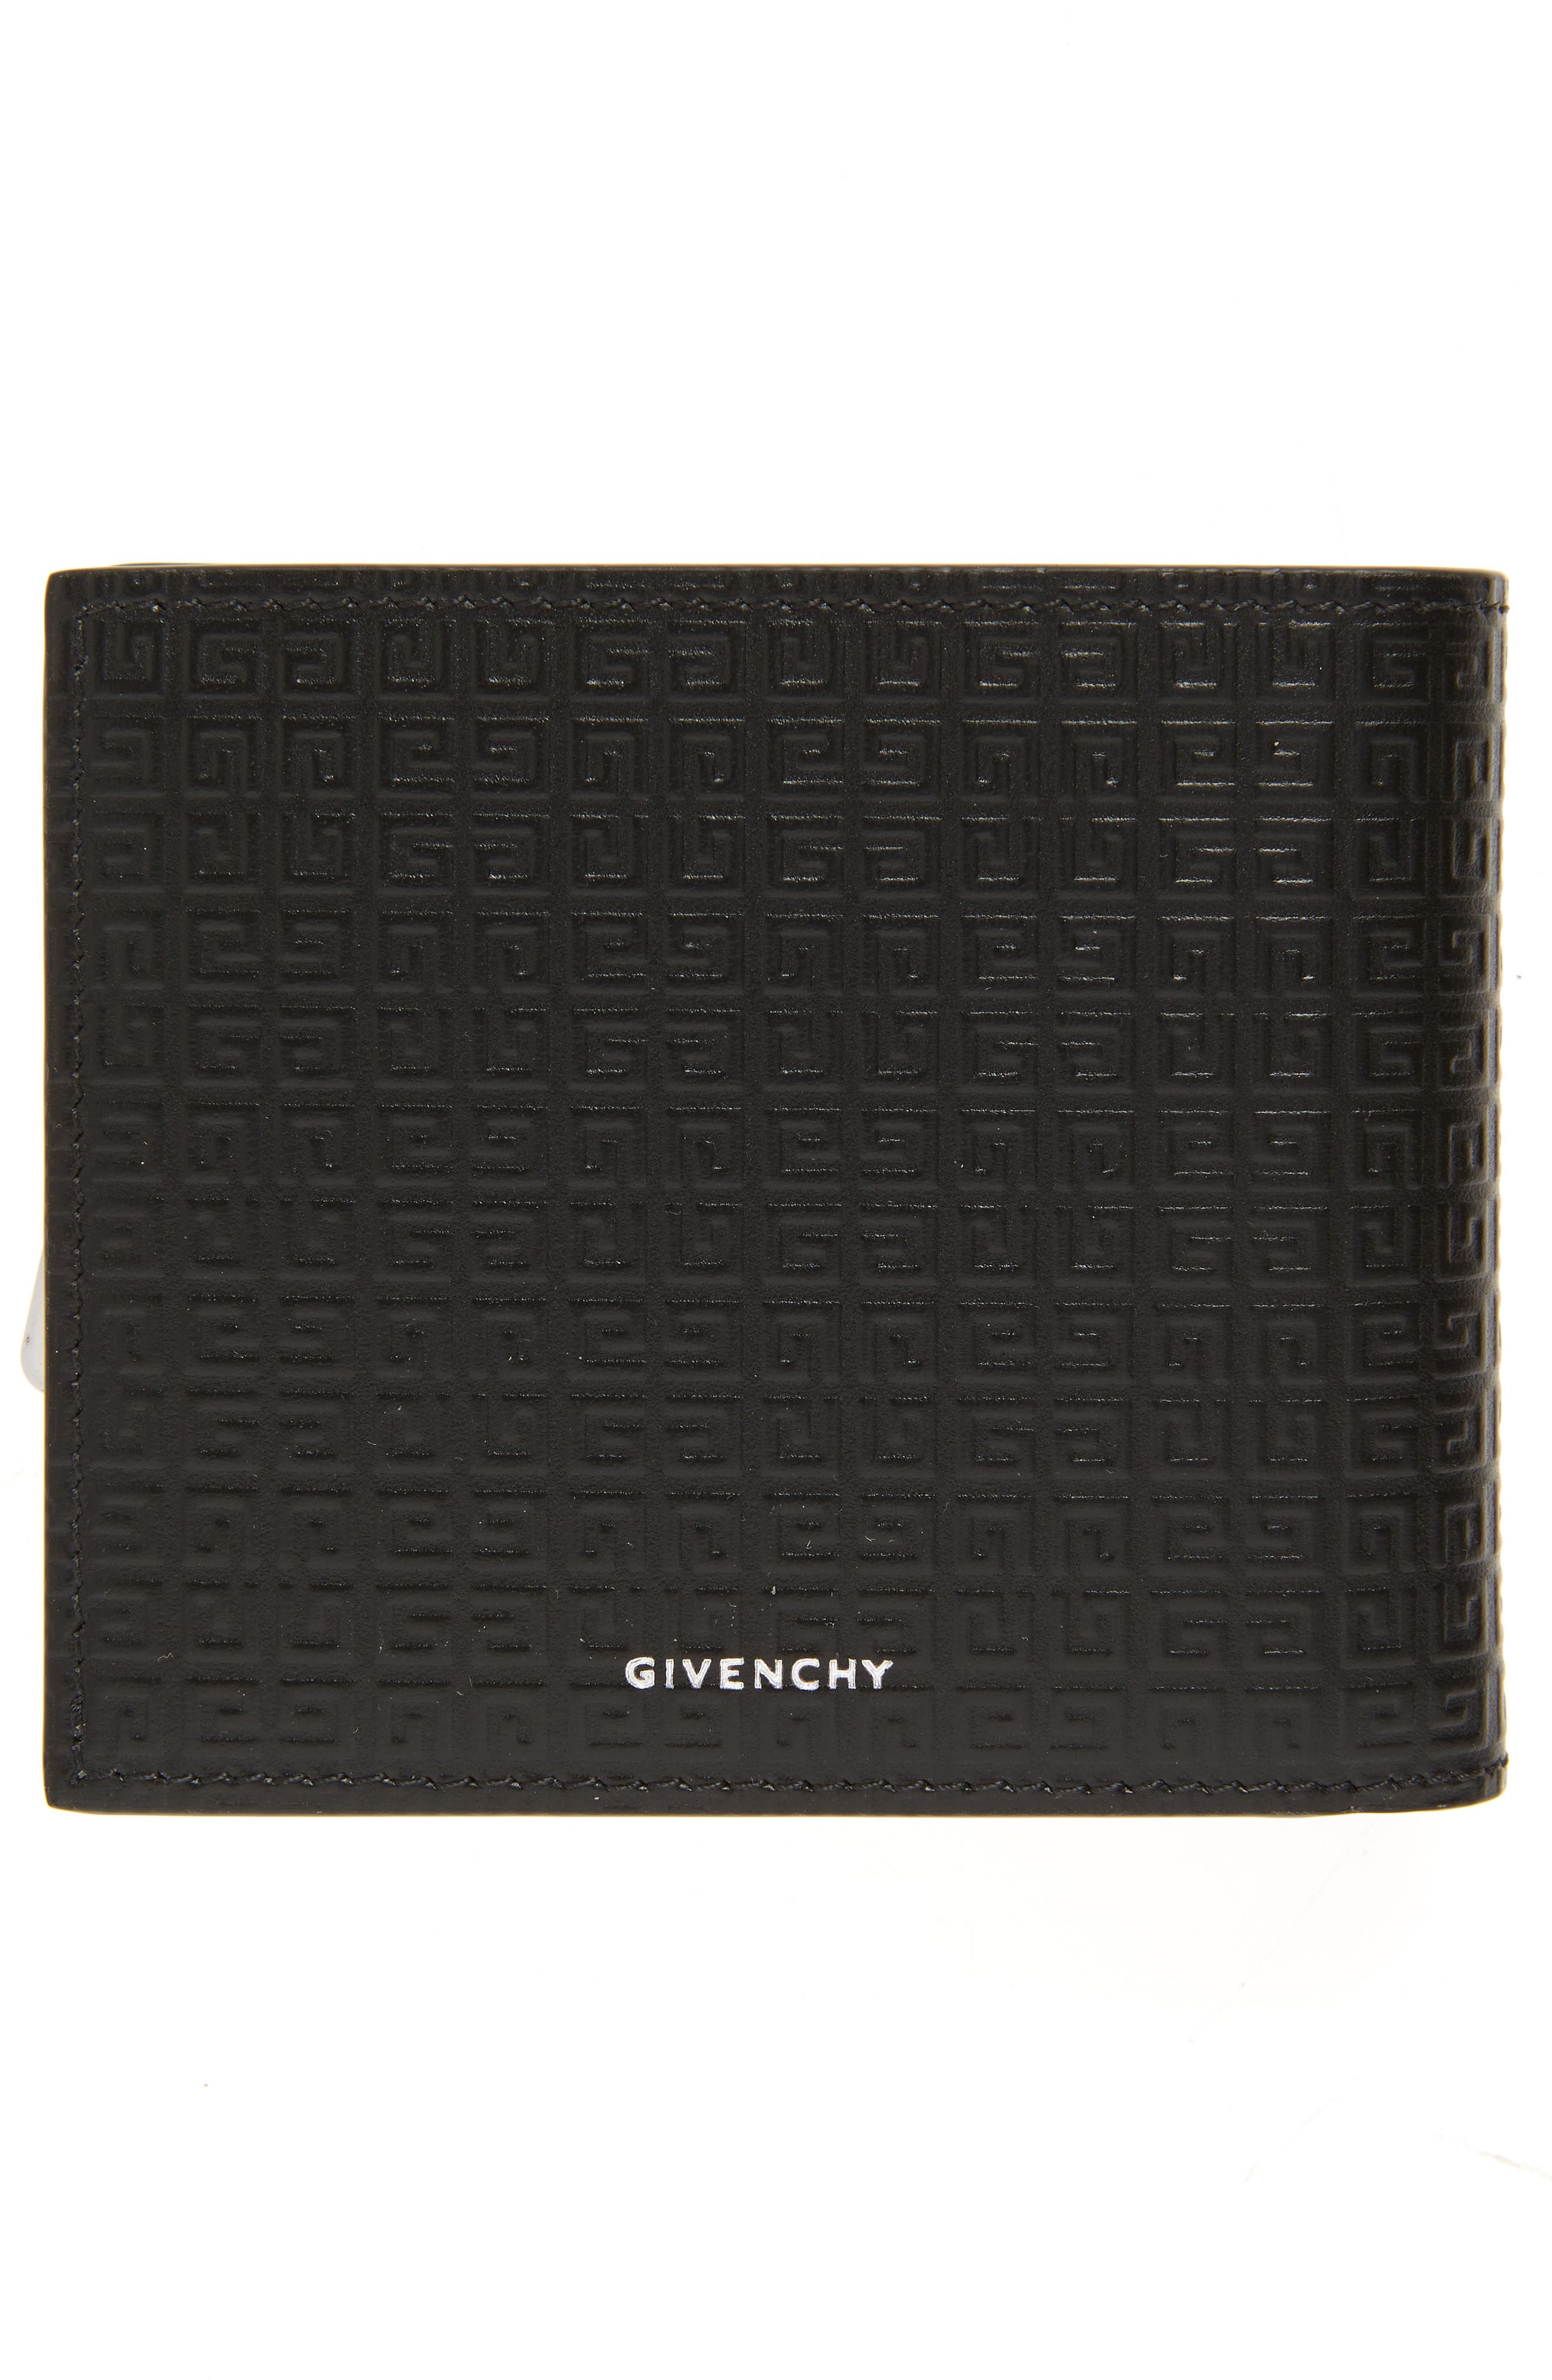 GIVENCHY - Bifold Leather Wallet